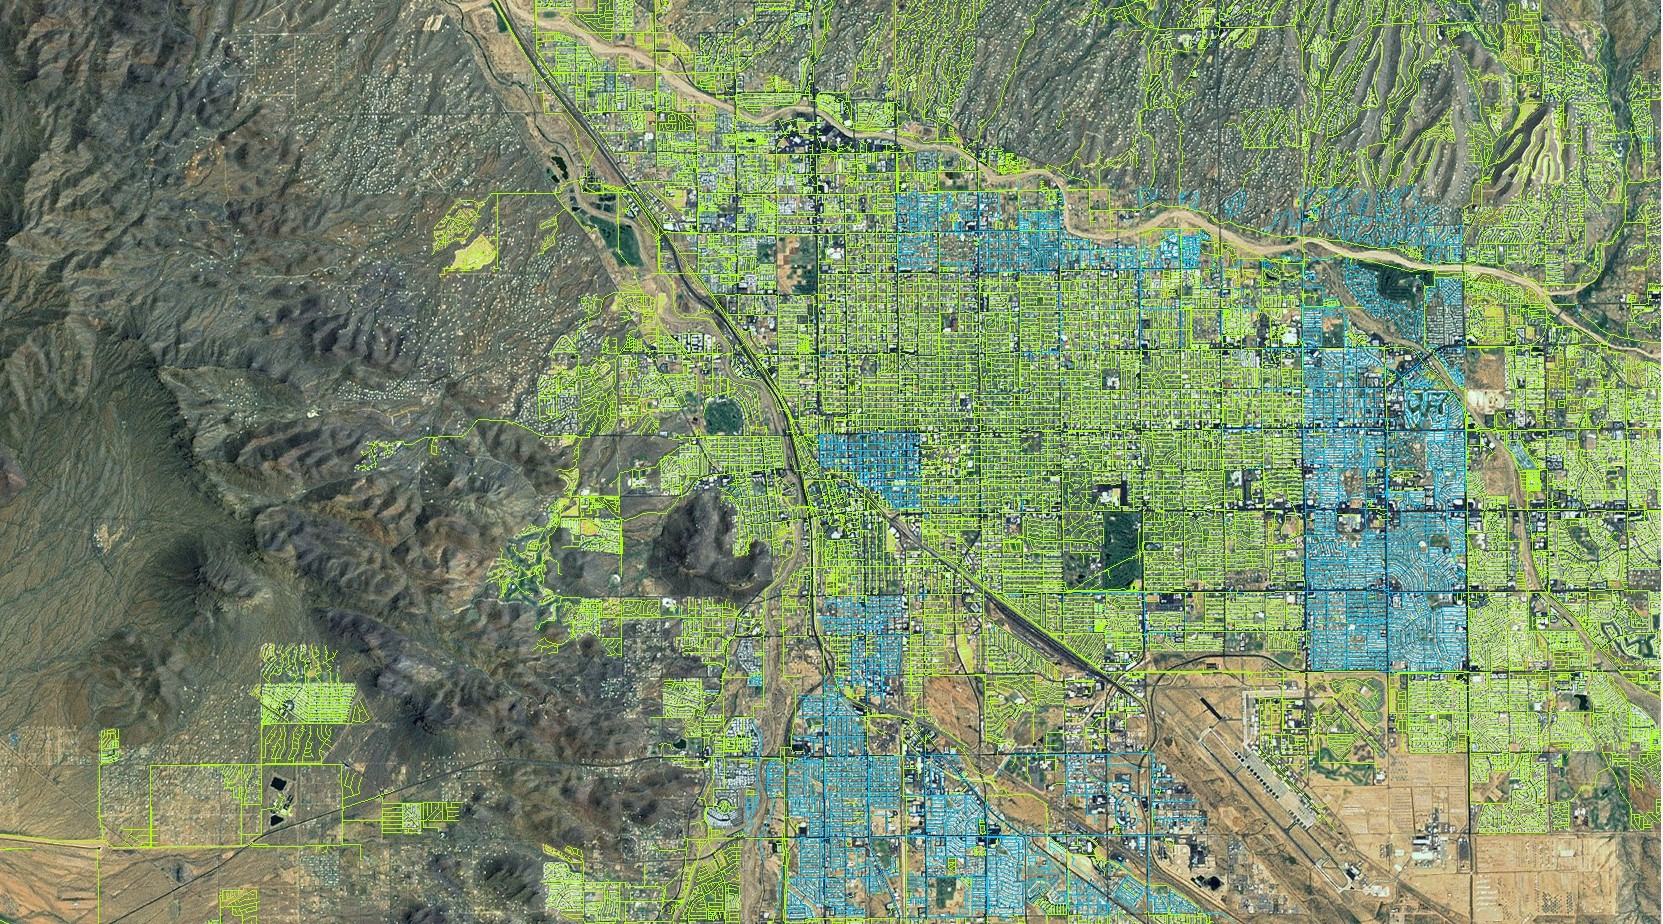 an aerial view of the city of Phoenix with GIS mapping data overlaid.